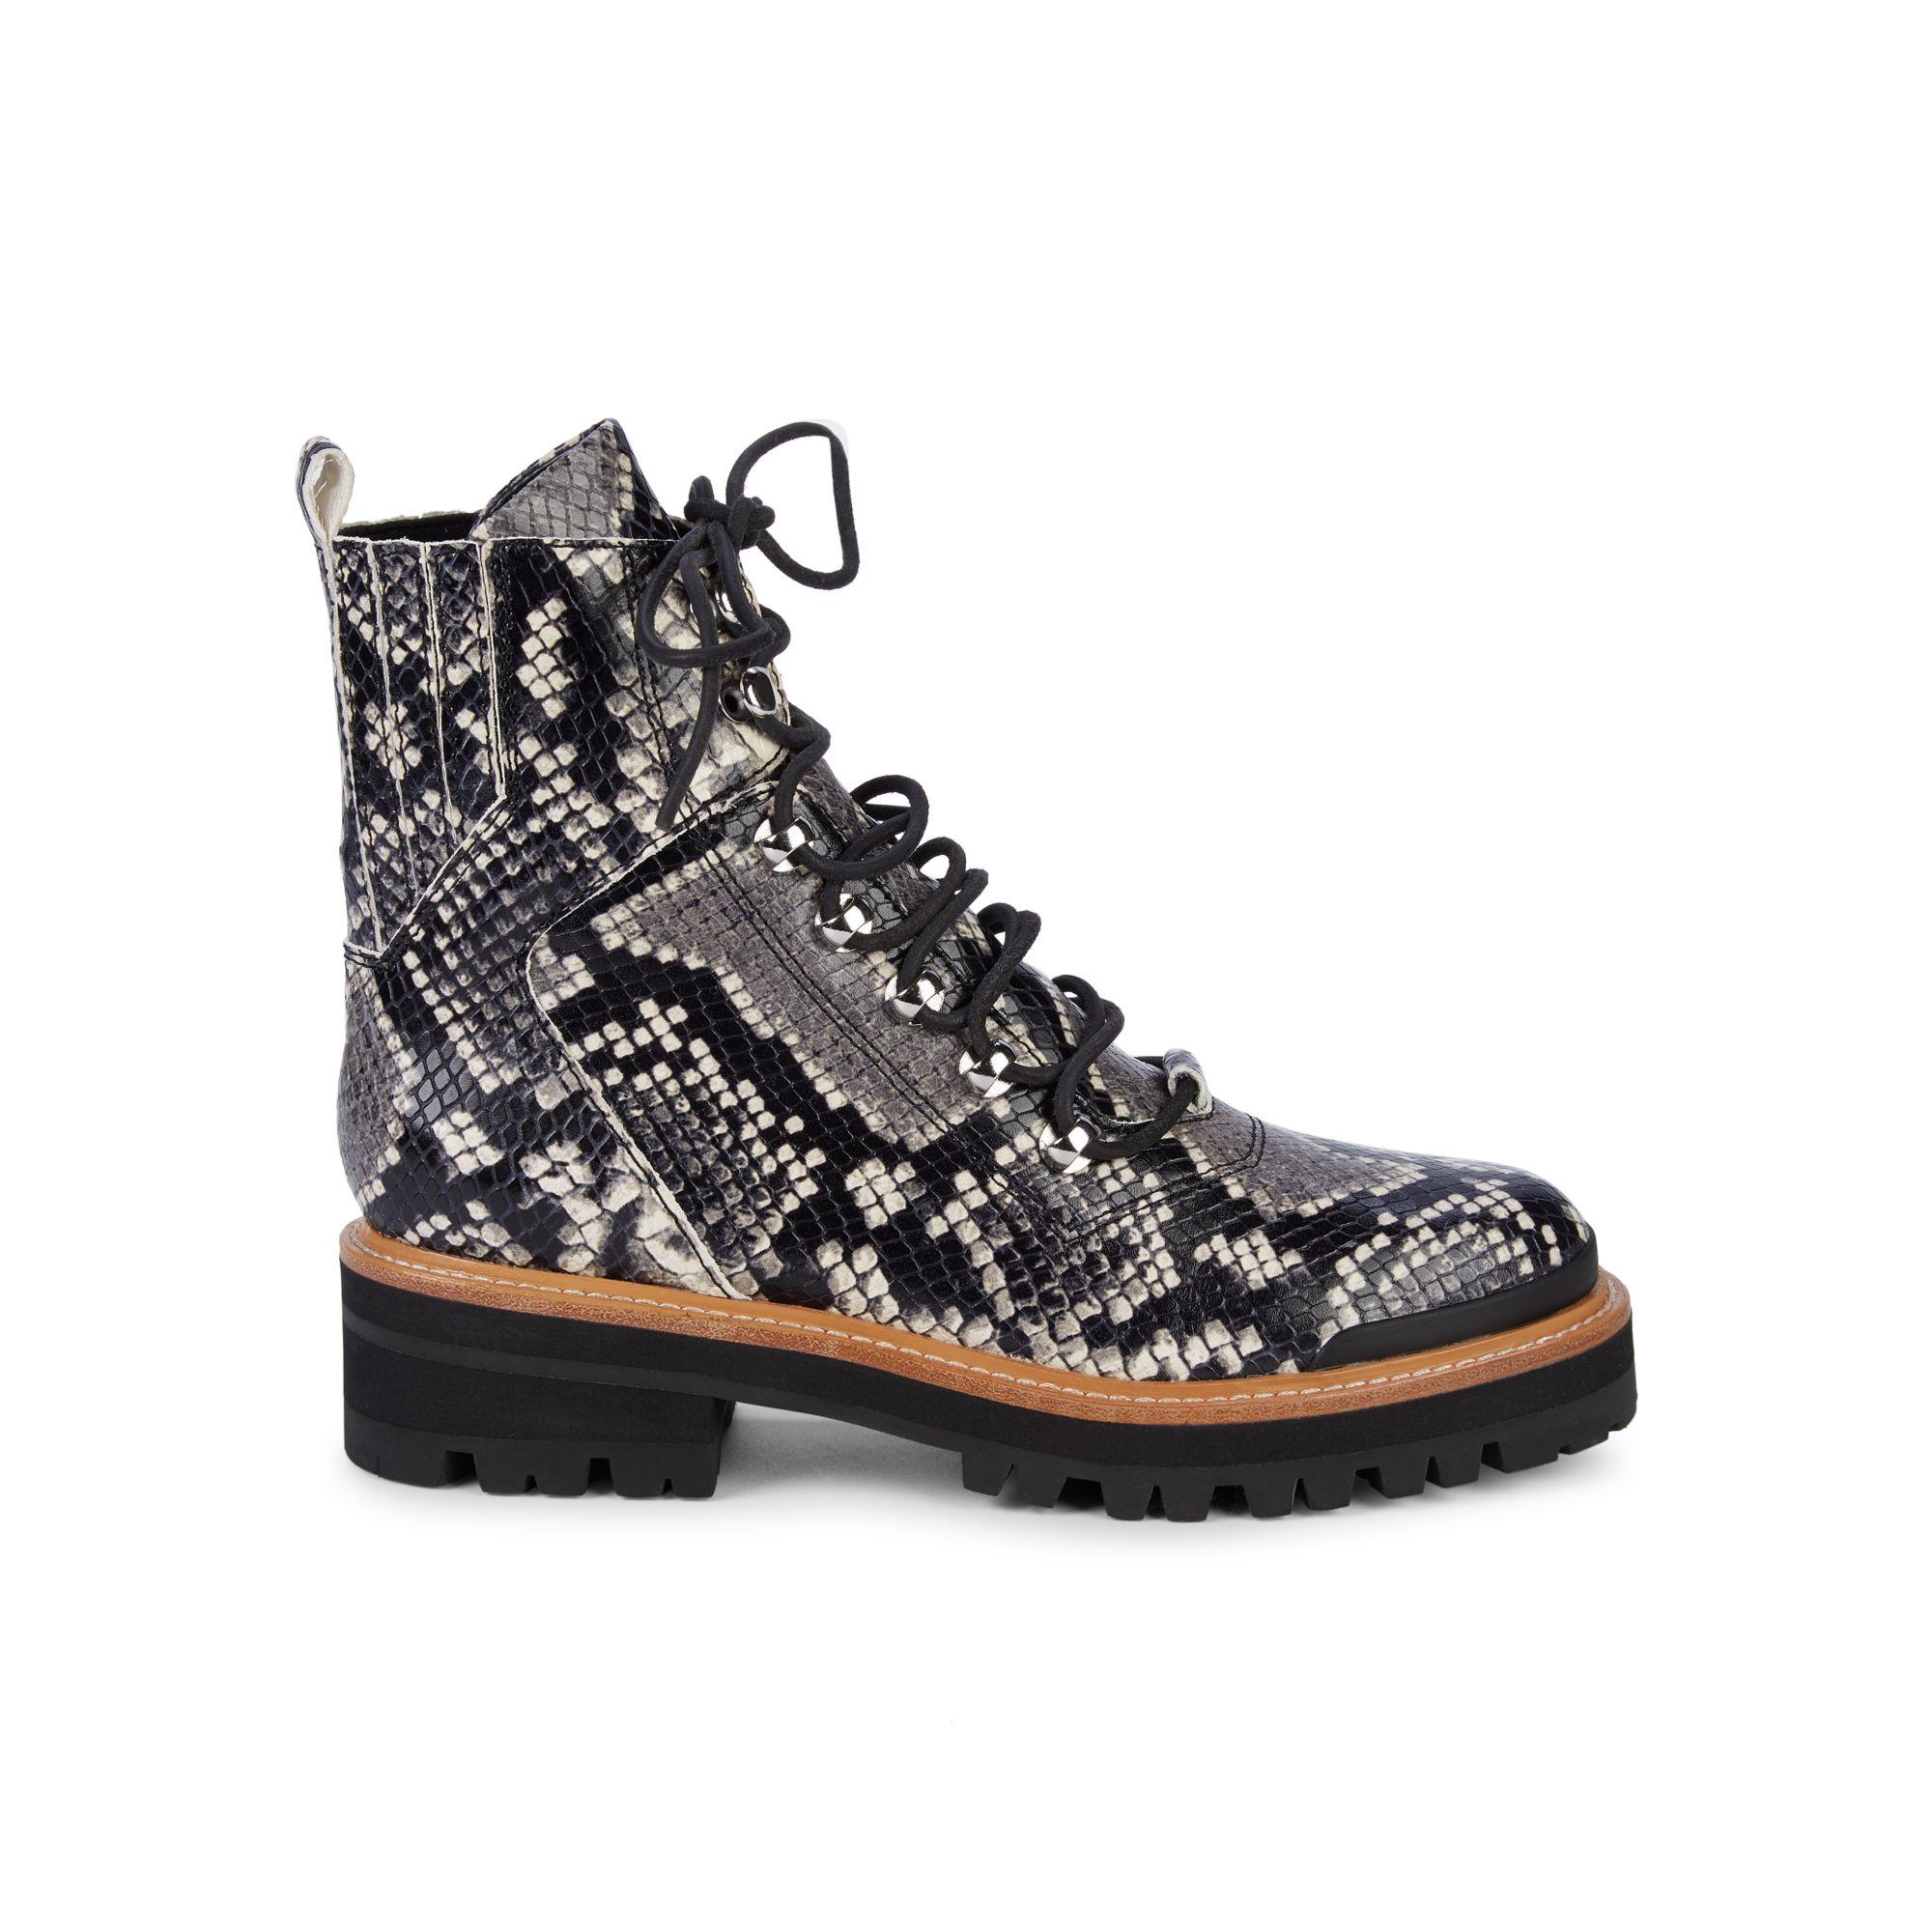 Marc Fisher Izzie 2 Embossed-snakeskin Leather Combat Boots in Black - Lyst